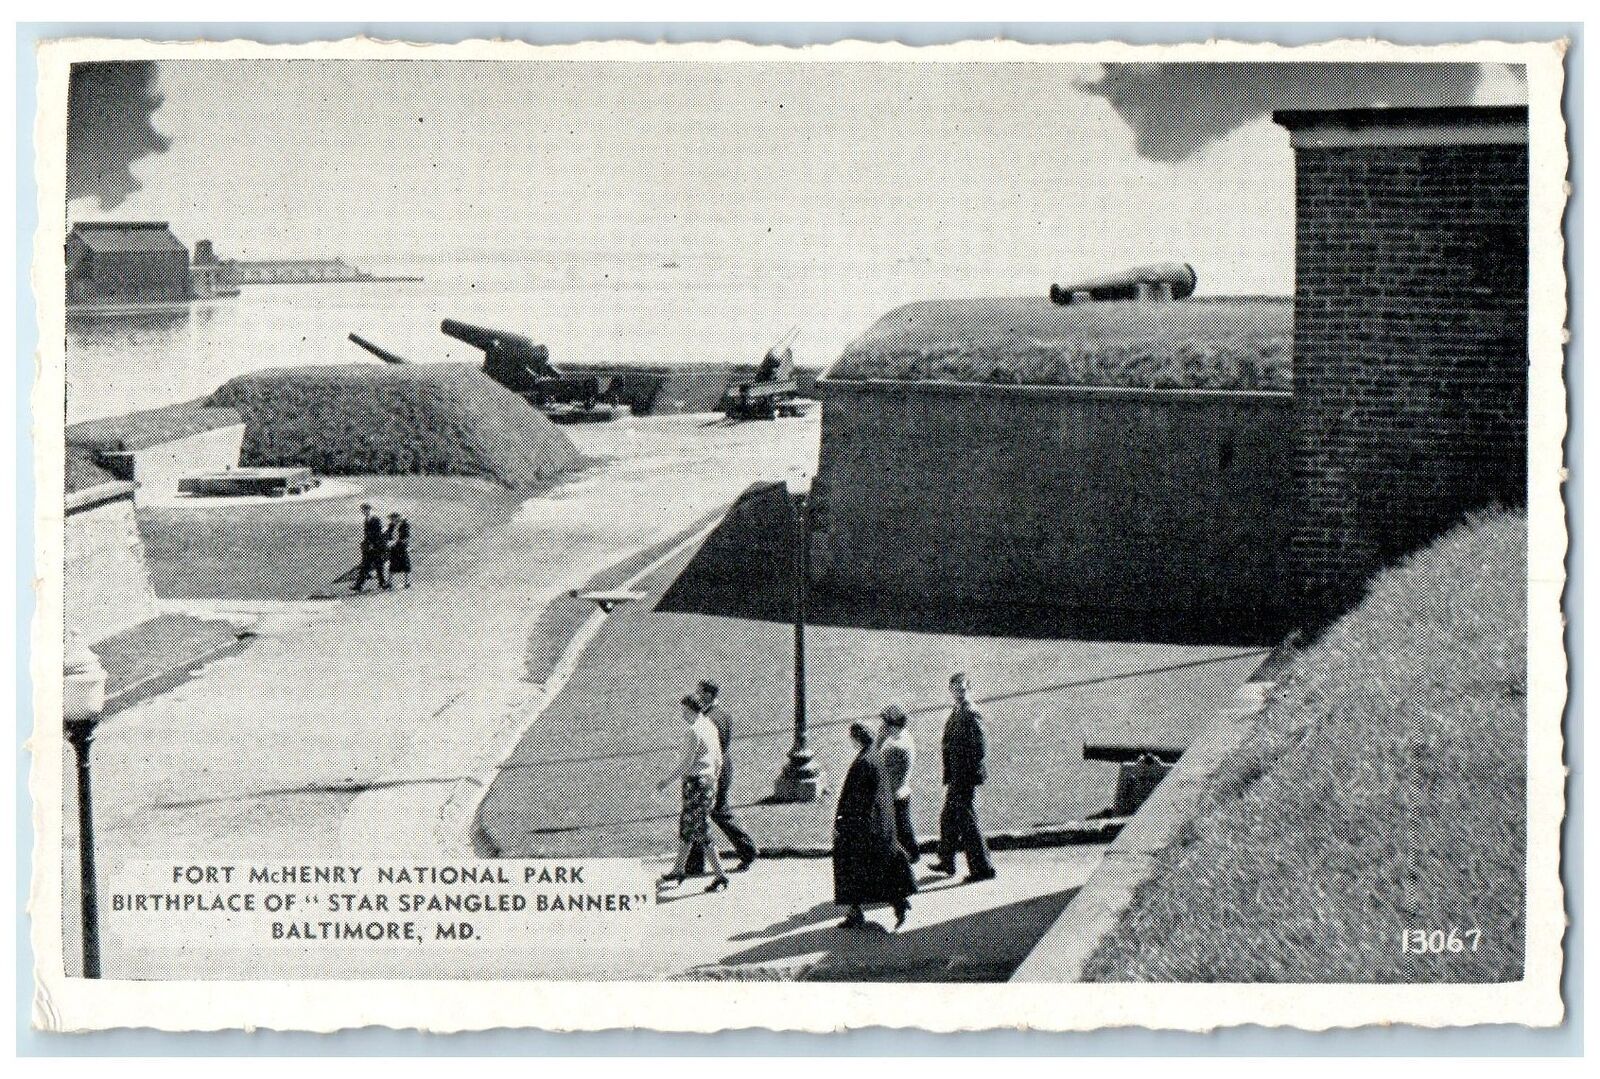 c1950 Fort McHenry National Park Birthplace Spangled Baltimore Maryland Postcard